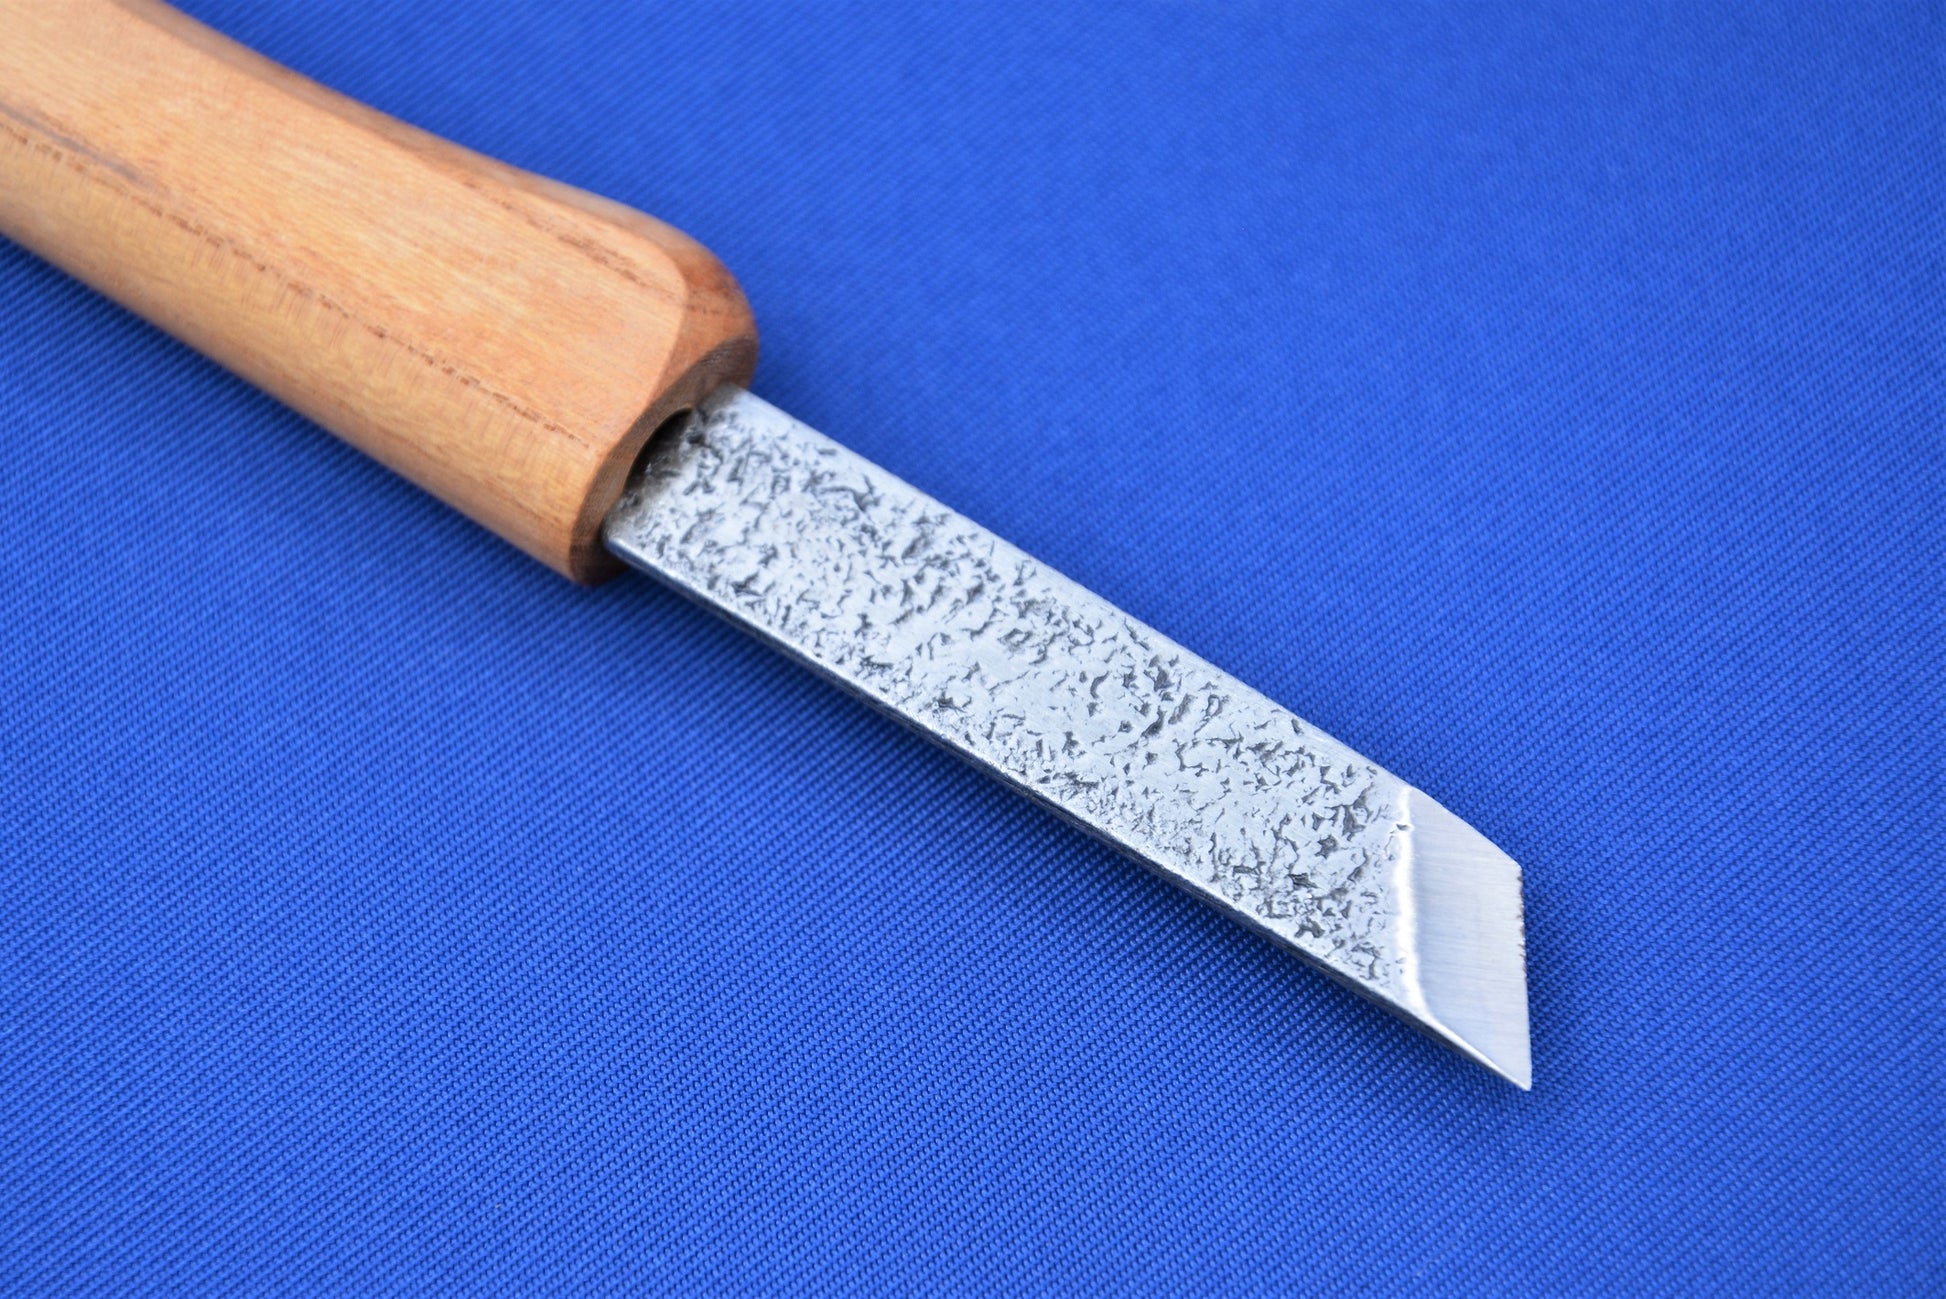 Wood Carving Knife - Tanto